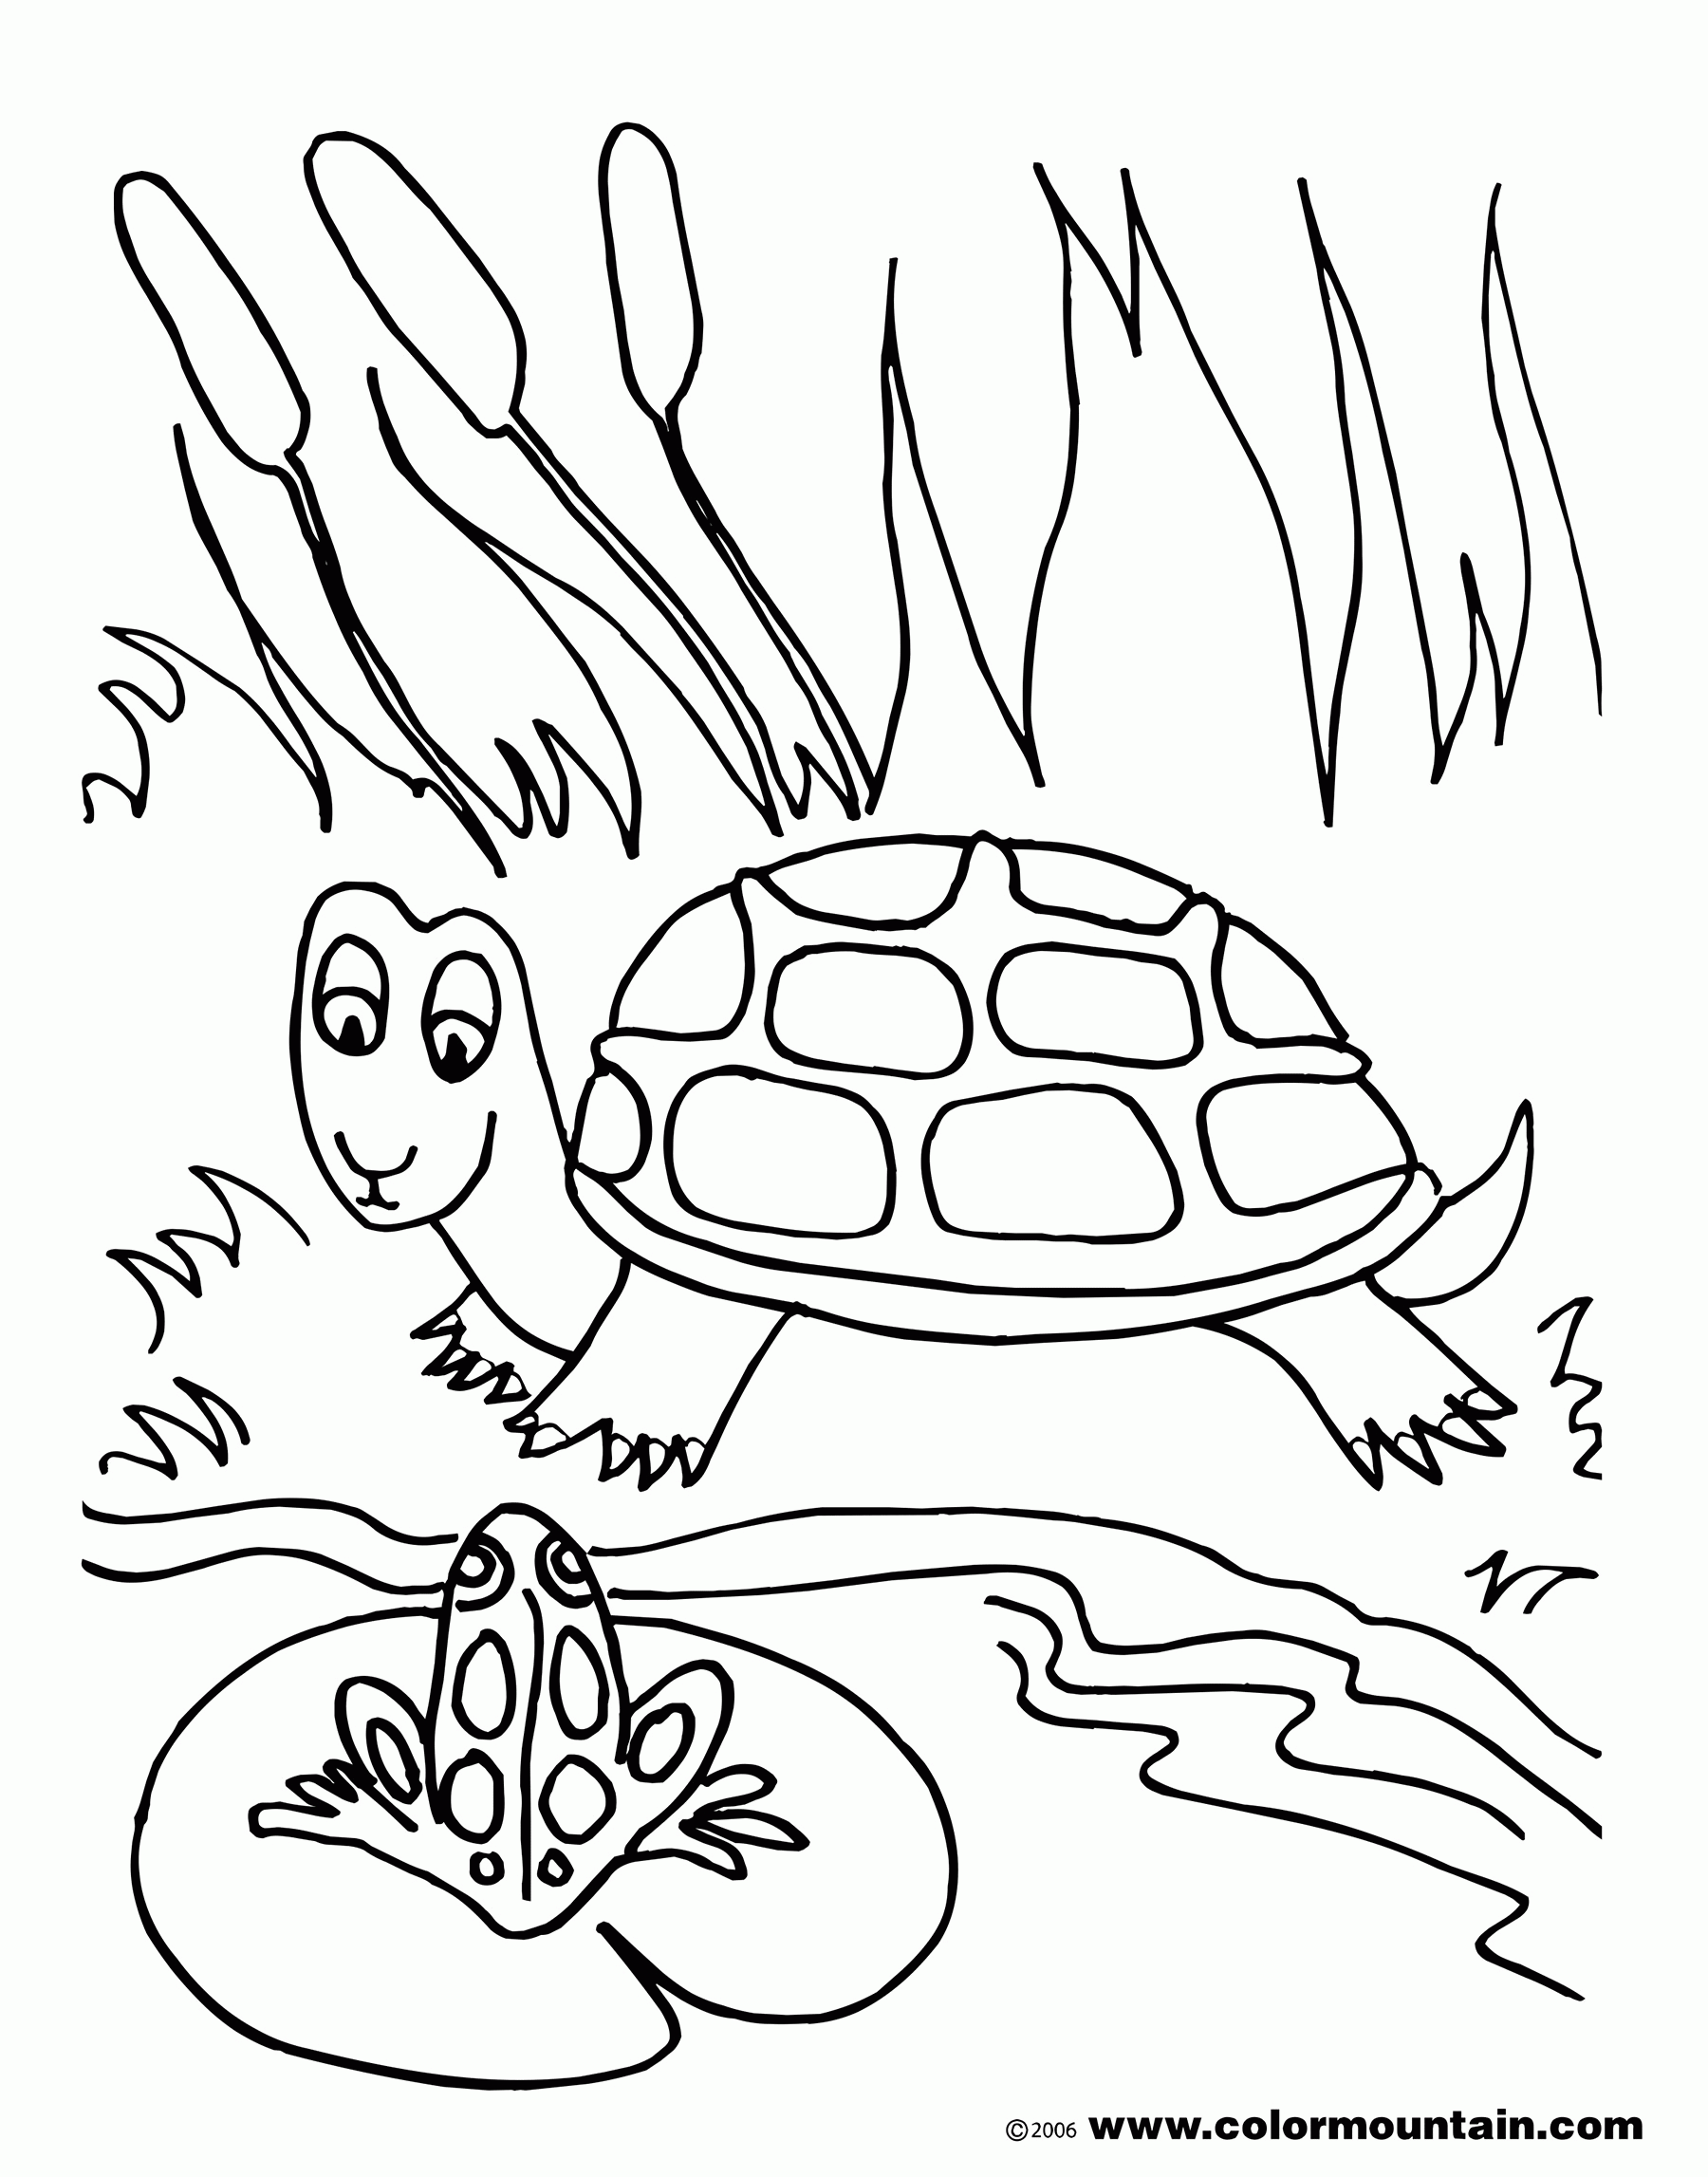 pond-animals-coloring-pages-coloring-pages